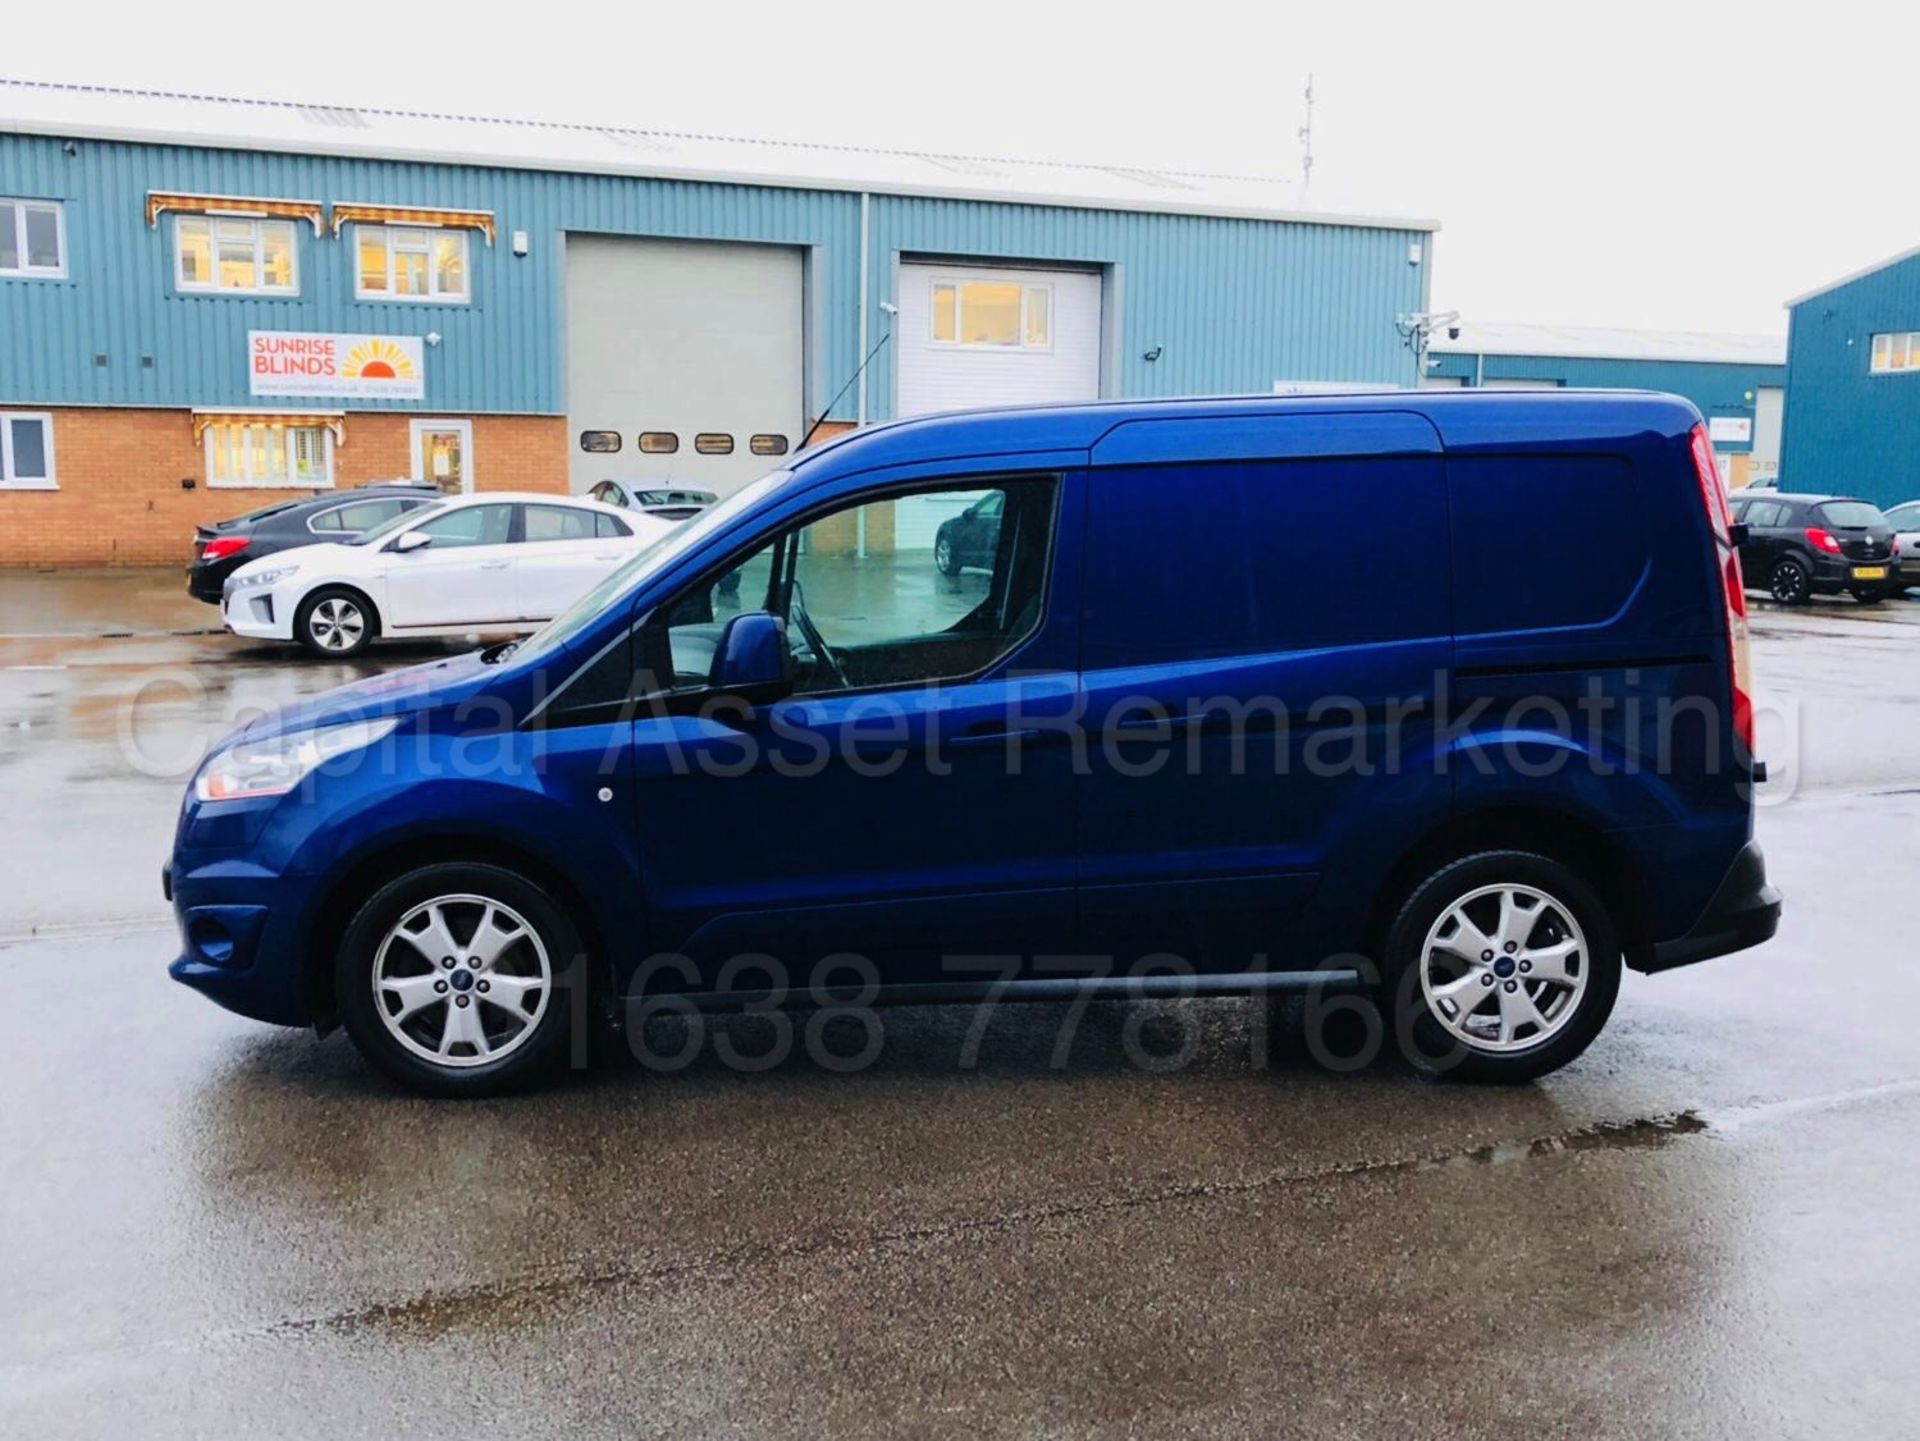 FORD TRANSIT CONNECT 'LIMITED' (2015 - FACELIFT MODEL) '1.6 TDCI - 115 PS - 6 SPEED' *A/C* (1 OWNER) - Image 2 of 28